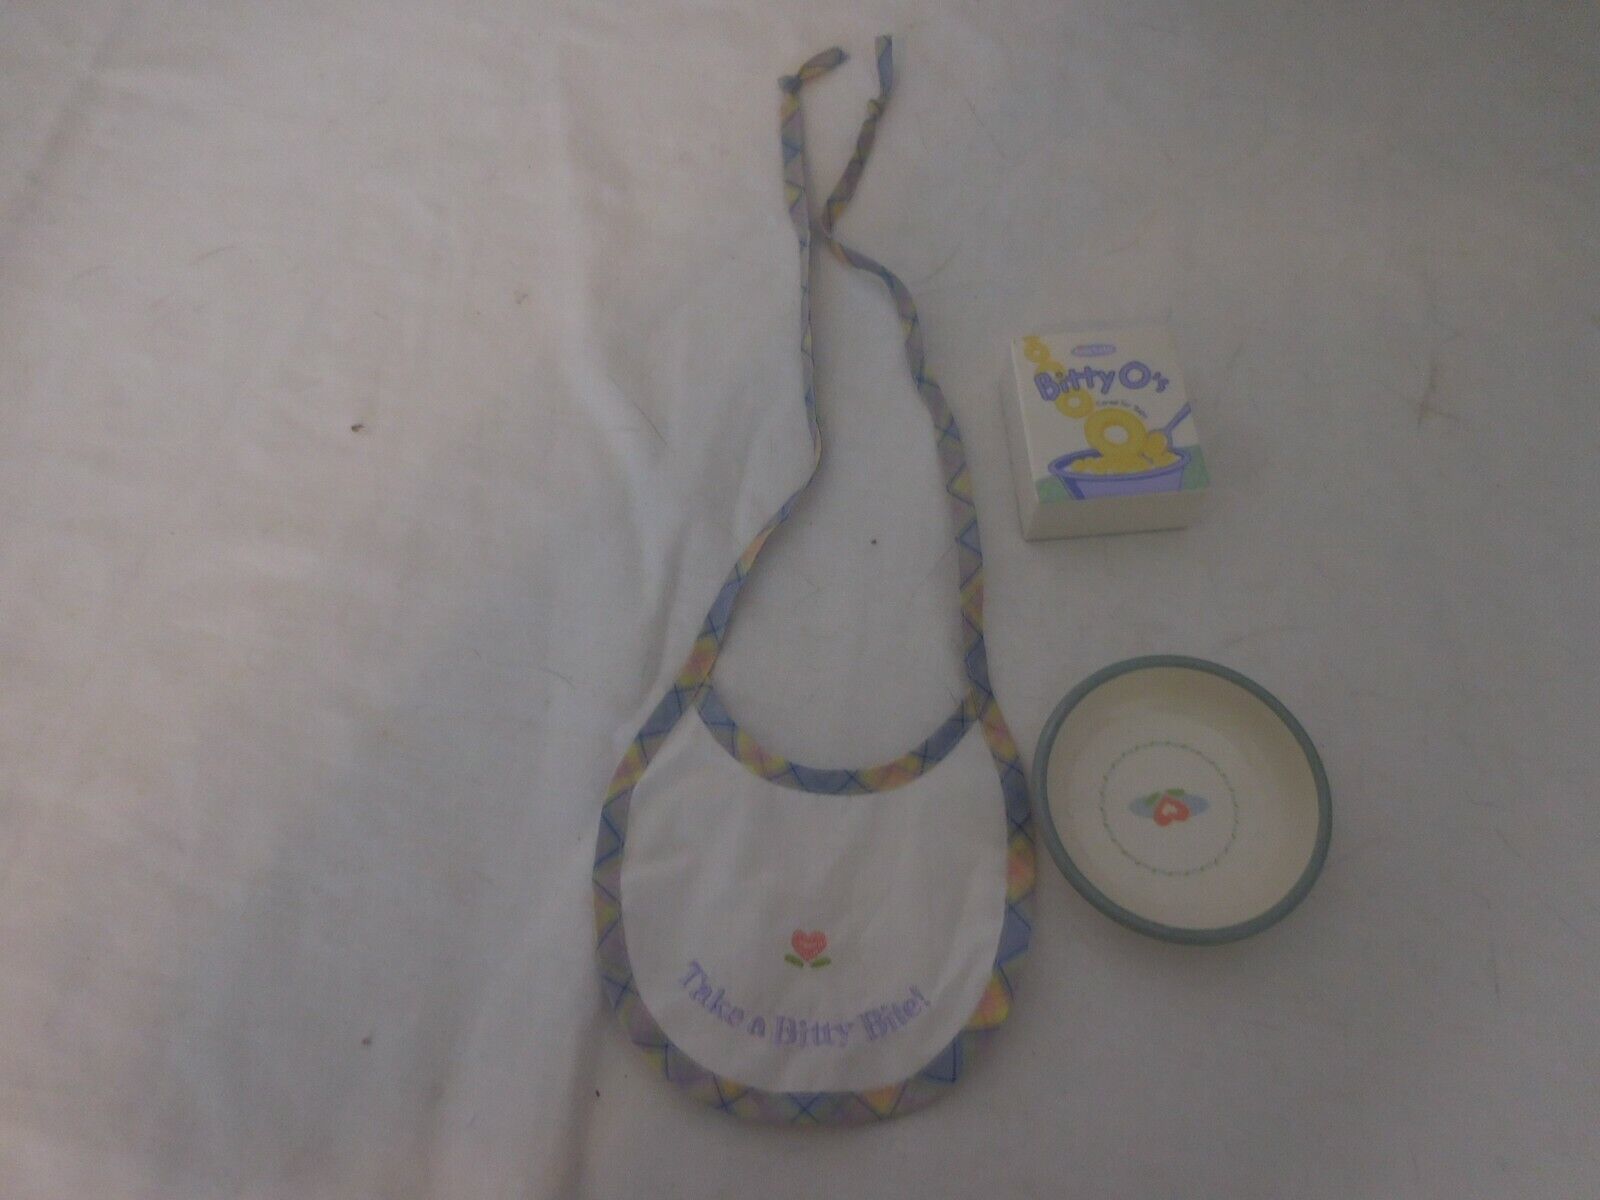 American Girl Bitty Baby's Lunch Fun Set 2003 Bowl and Cereal + Bib from Breakfe - $20.80